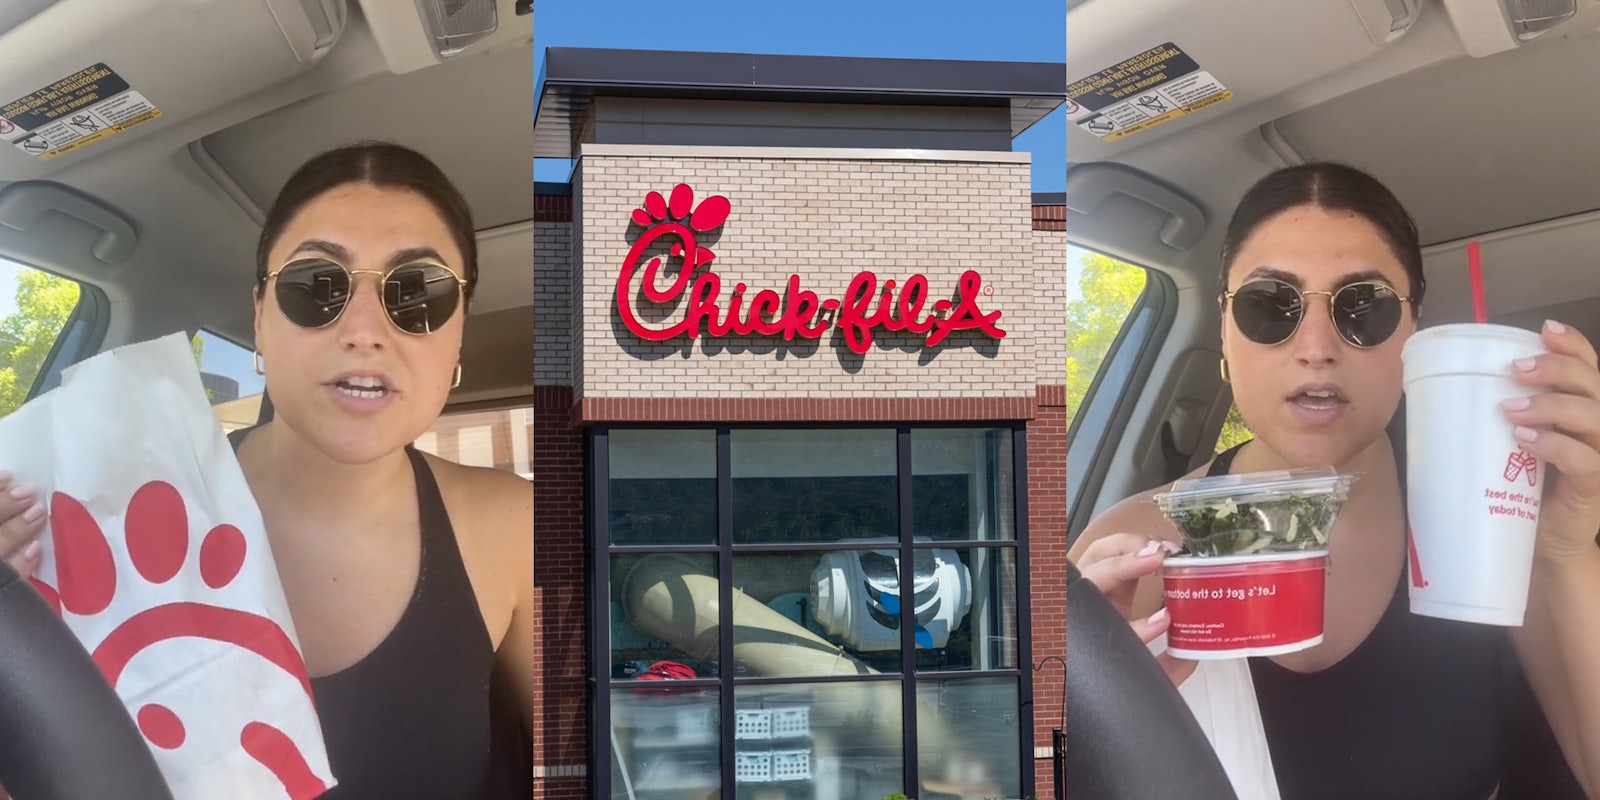 Chick-Fil-A customer in car speaking holding bag (l) Chick-Fil-A building with sign and blue sky (c) Chick-Fil-A customer in car speaking holding small amount of food with drink (r)